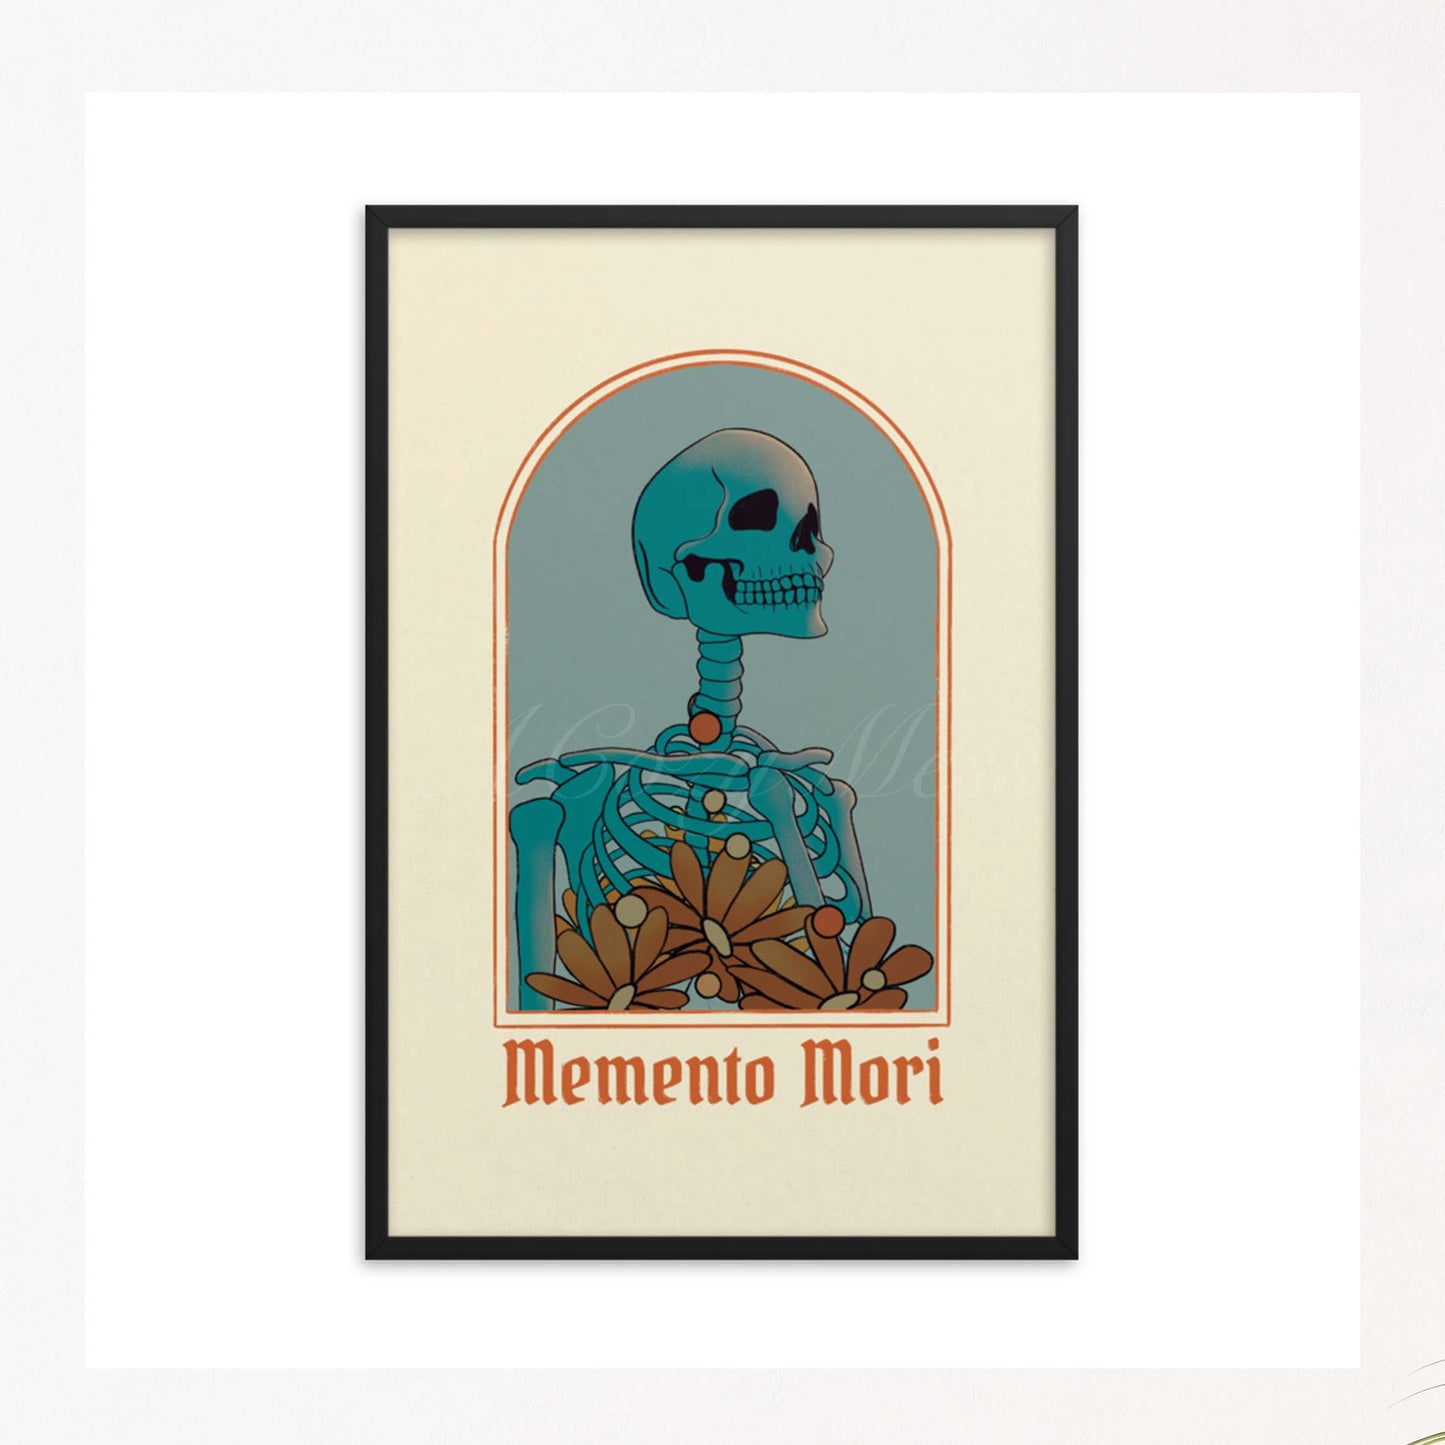 An art poster featuring a striking skeleton illustration with the words 'Memento Mori,' inviting reflection on mortality and the transient nature of life in blue, beige & orange hues. The poster is framed in black frame.